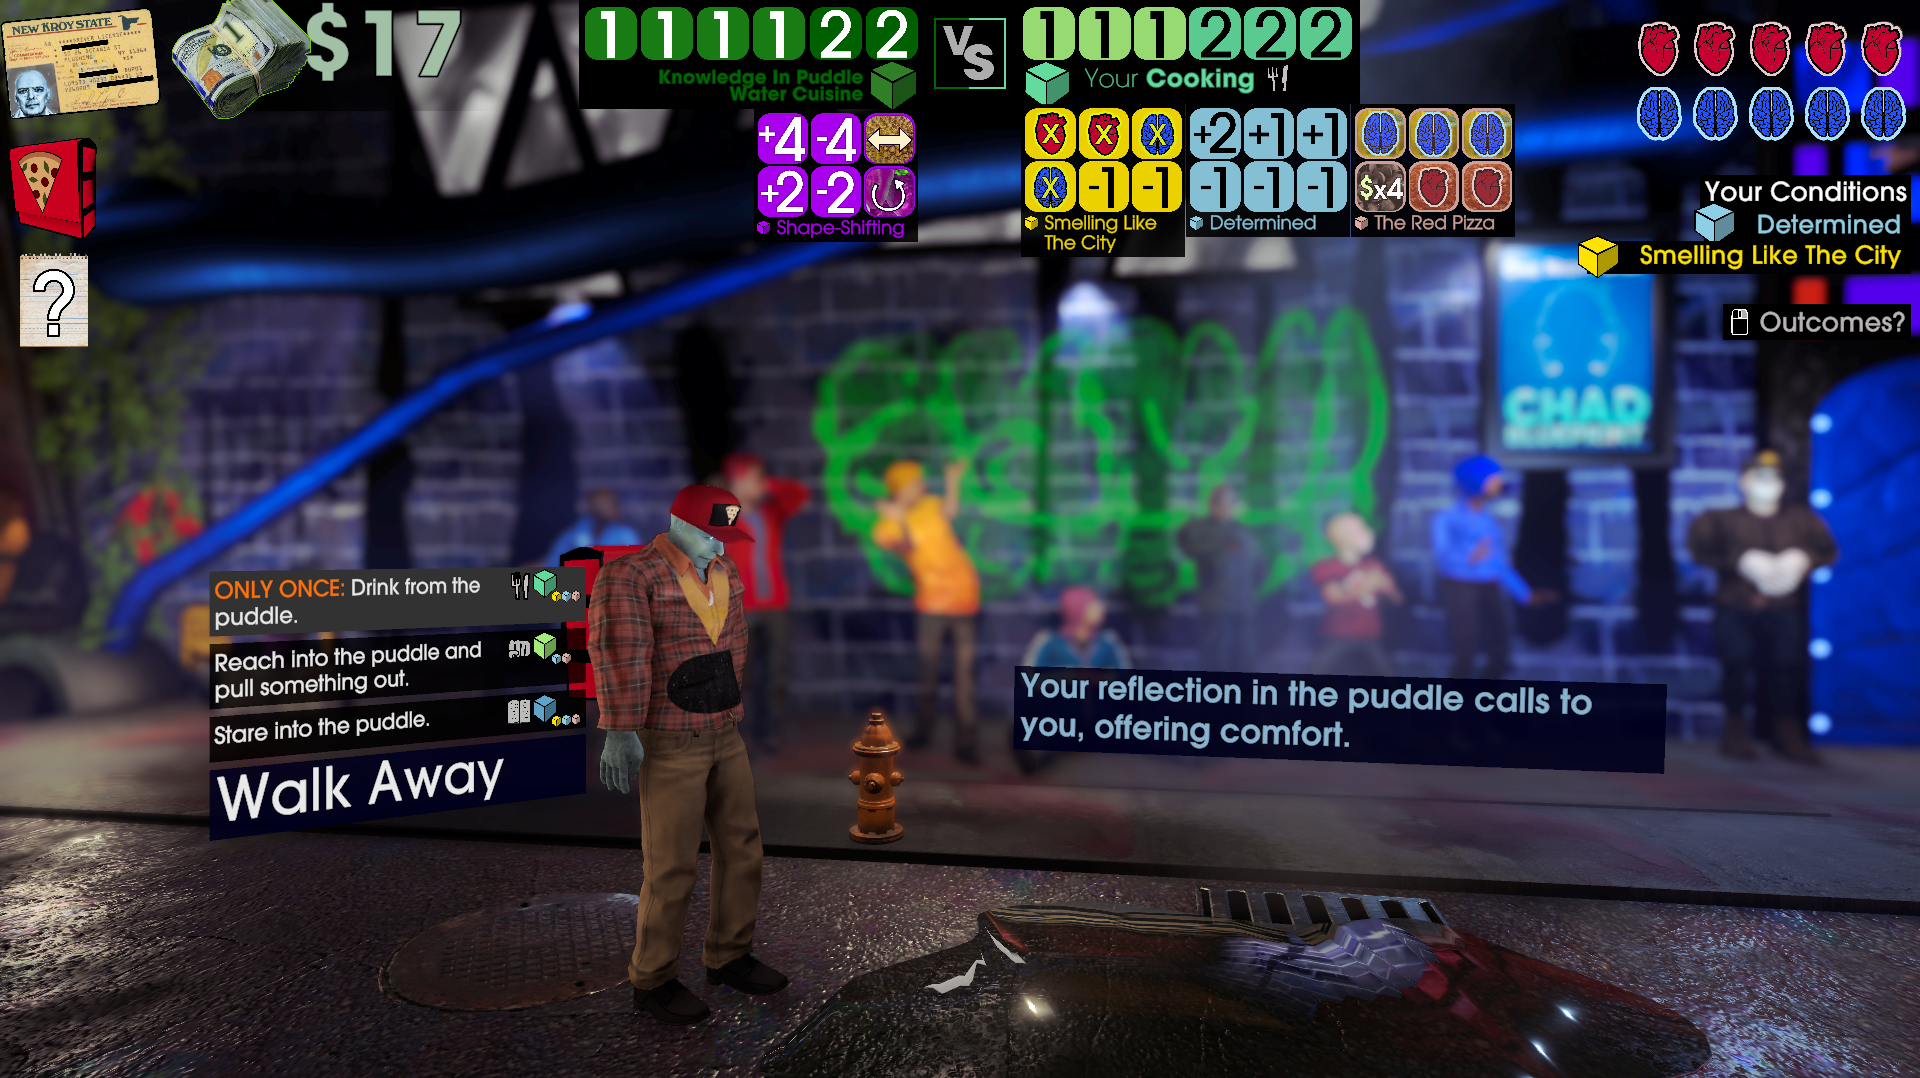 Screenshot of the player character being presented with the option to drink from a puddle